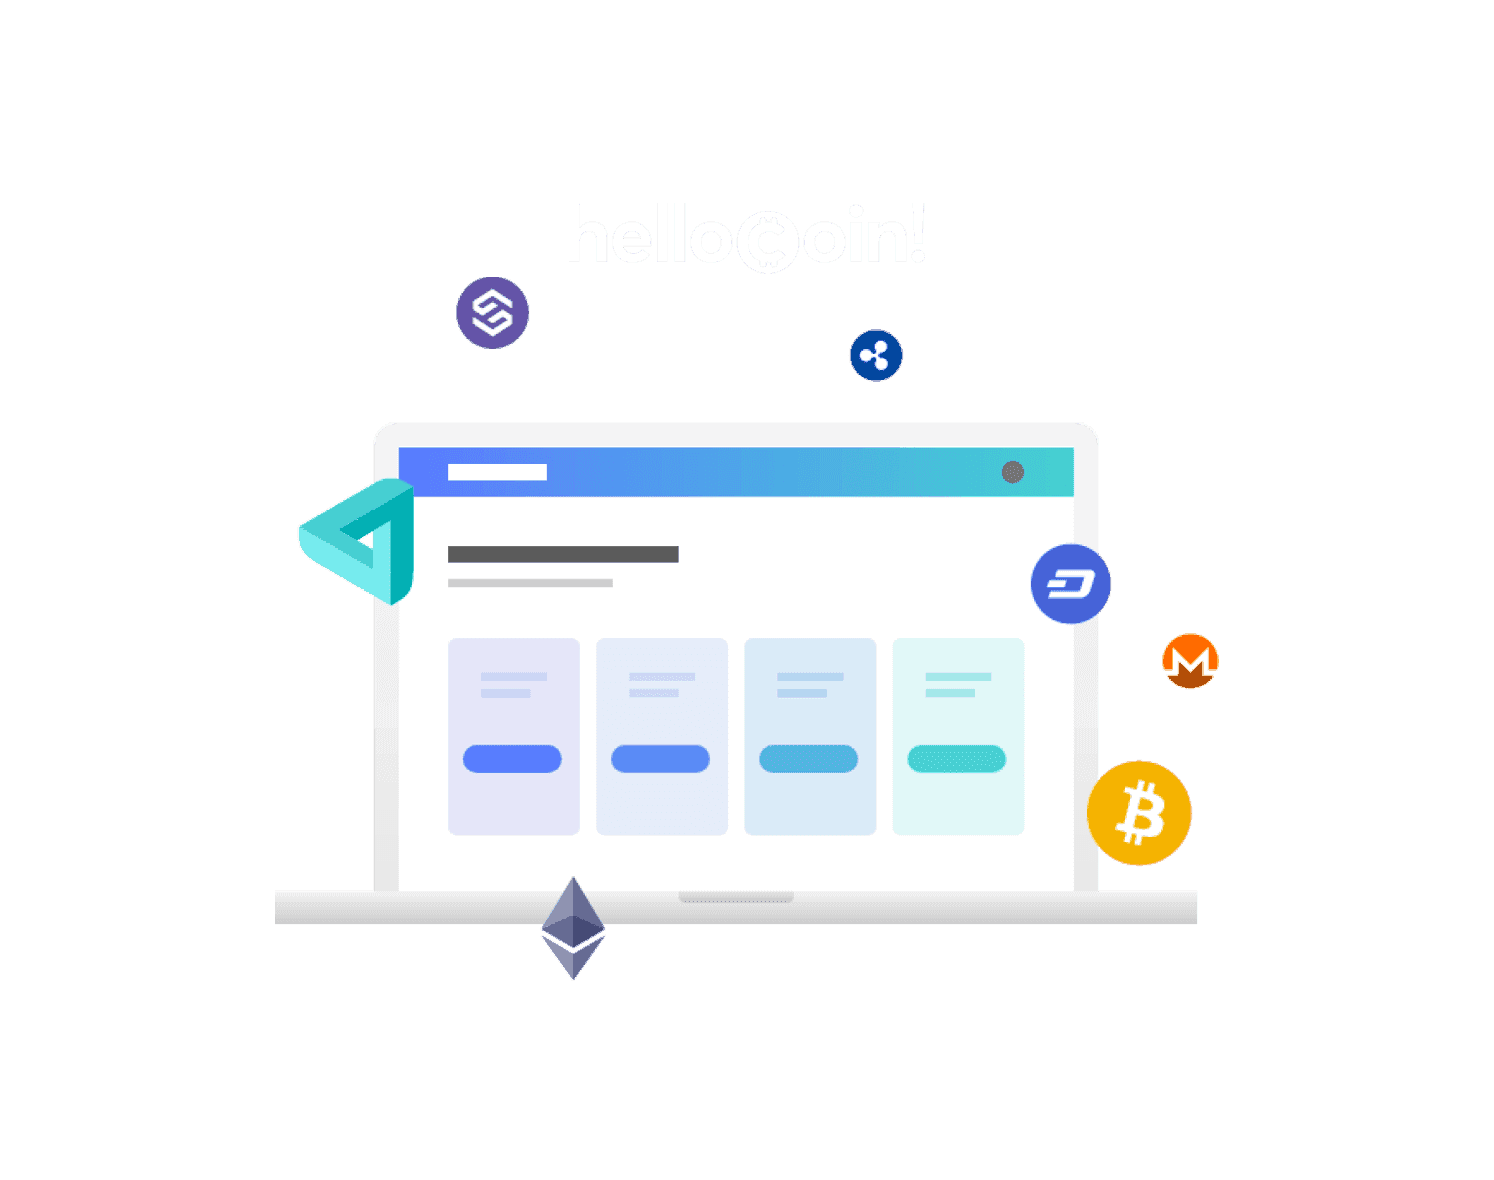 Hellocoin reference image